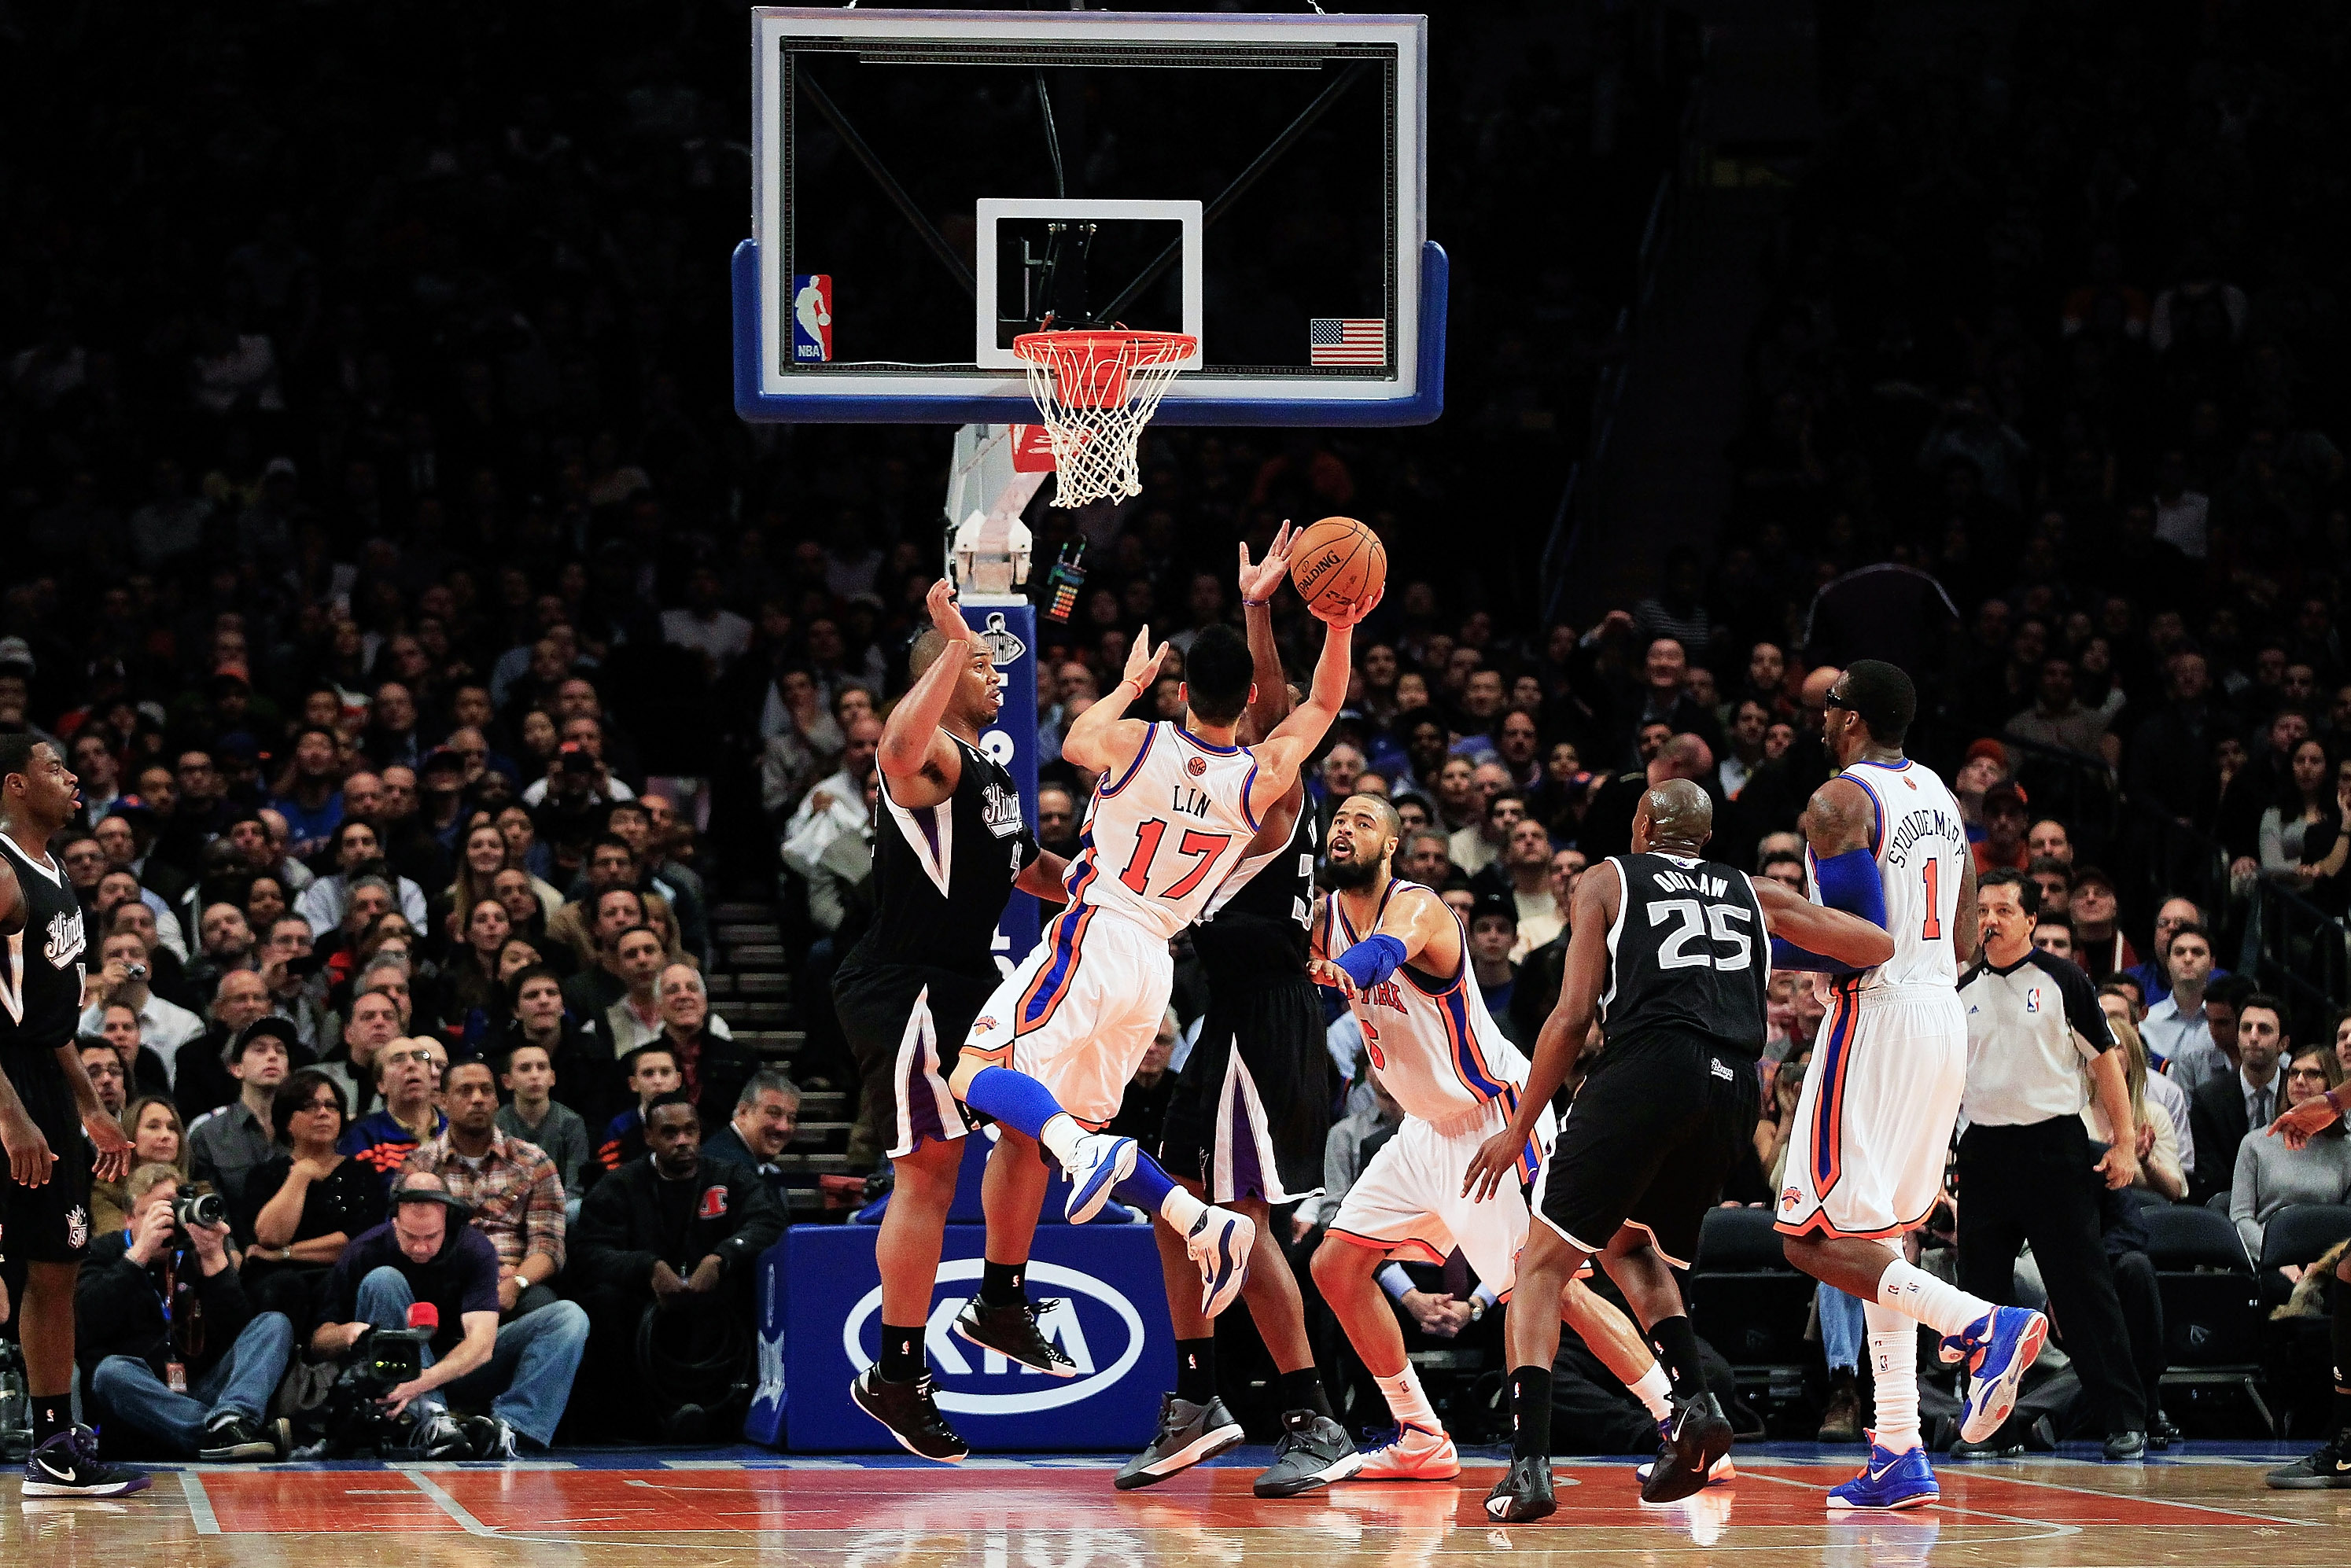 MSG Network to air 9 games from Jeremy Lin's 2012 Knicks run